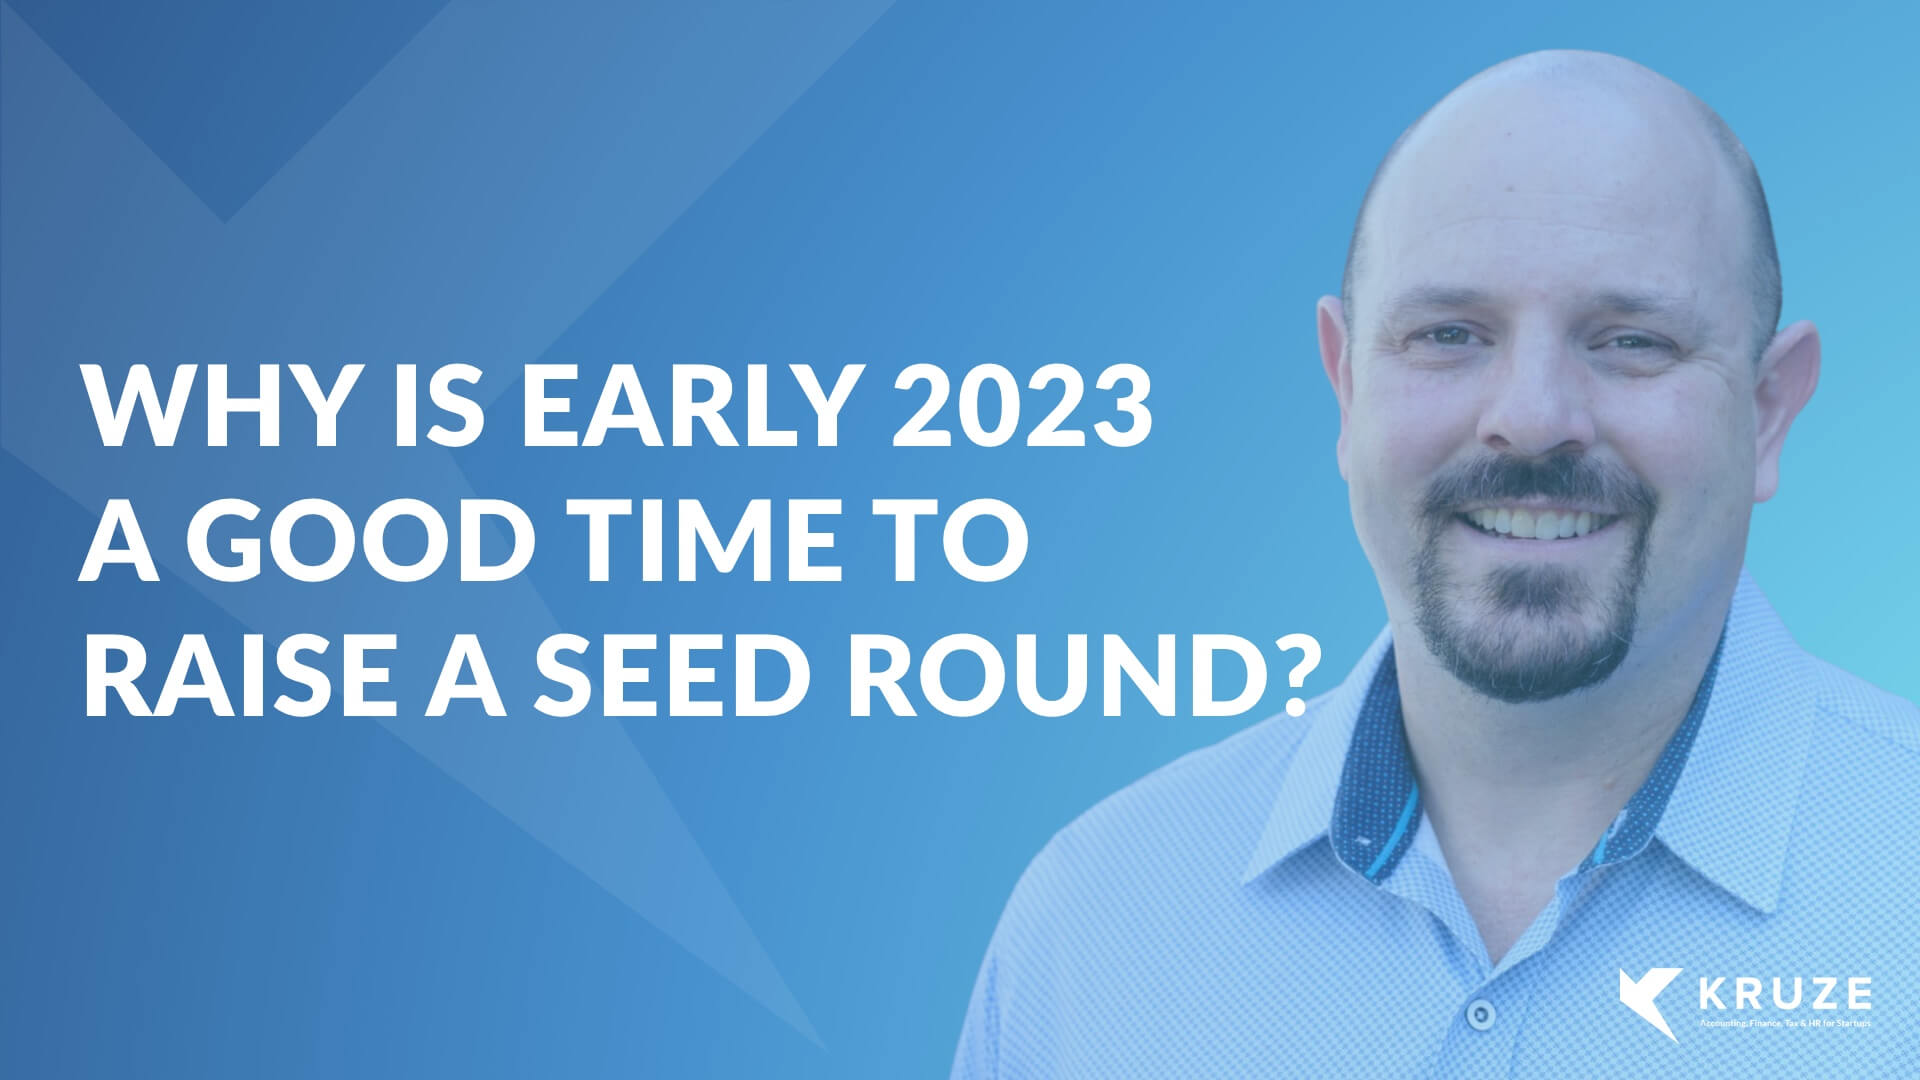 Seven Reasons Early 2023 is a Good Time to Raise a Seed Round